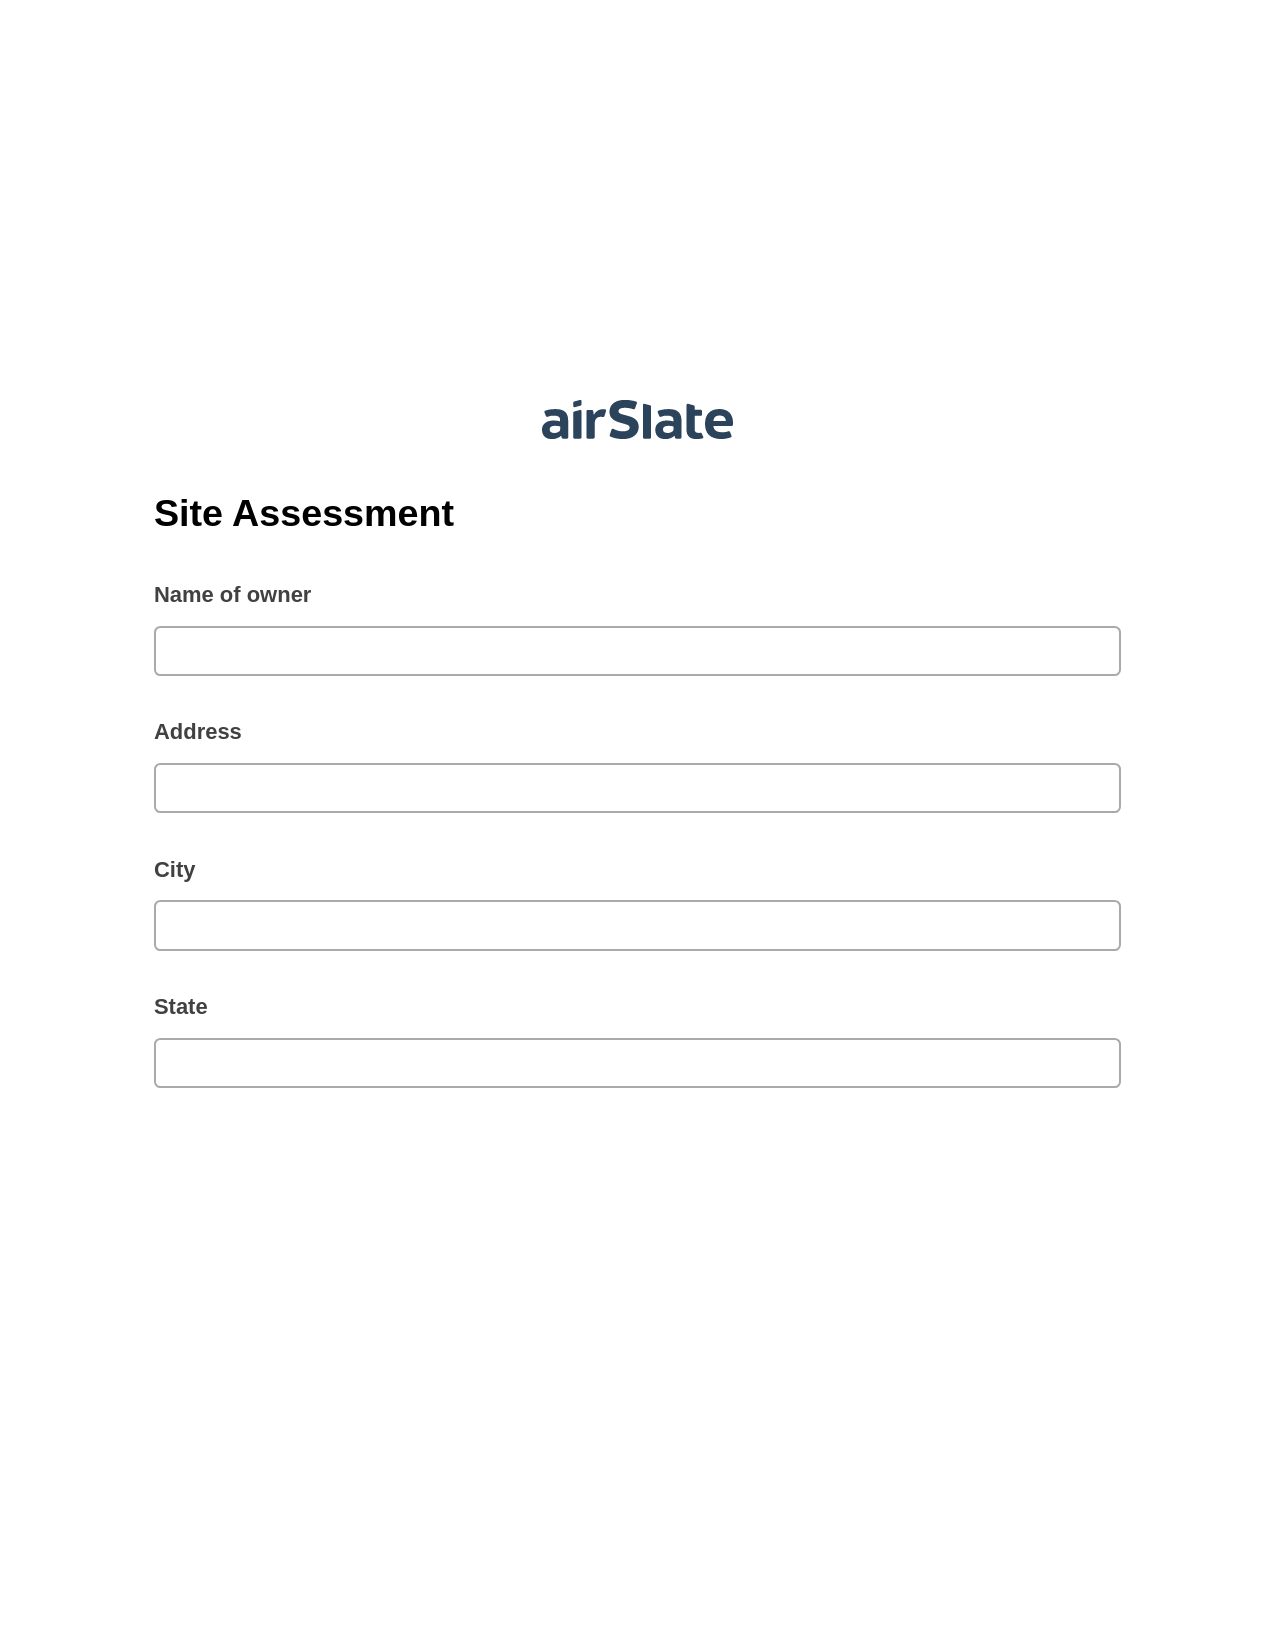 Site Assessment Pre-fill Slate from MS Dynamics 365 Records Bot, Create MS Dynamics 365 Records Bot, Export to NetSuite Record Bot